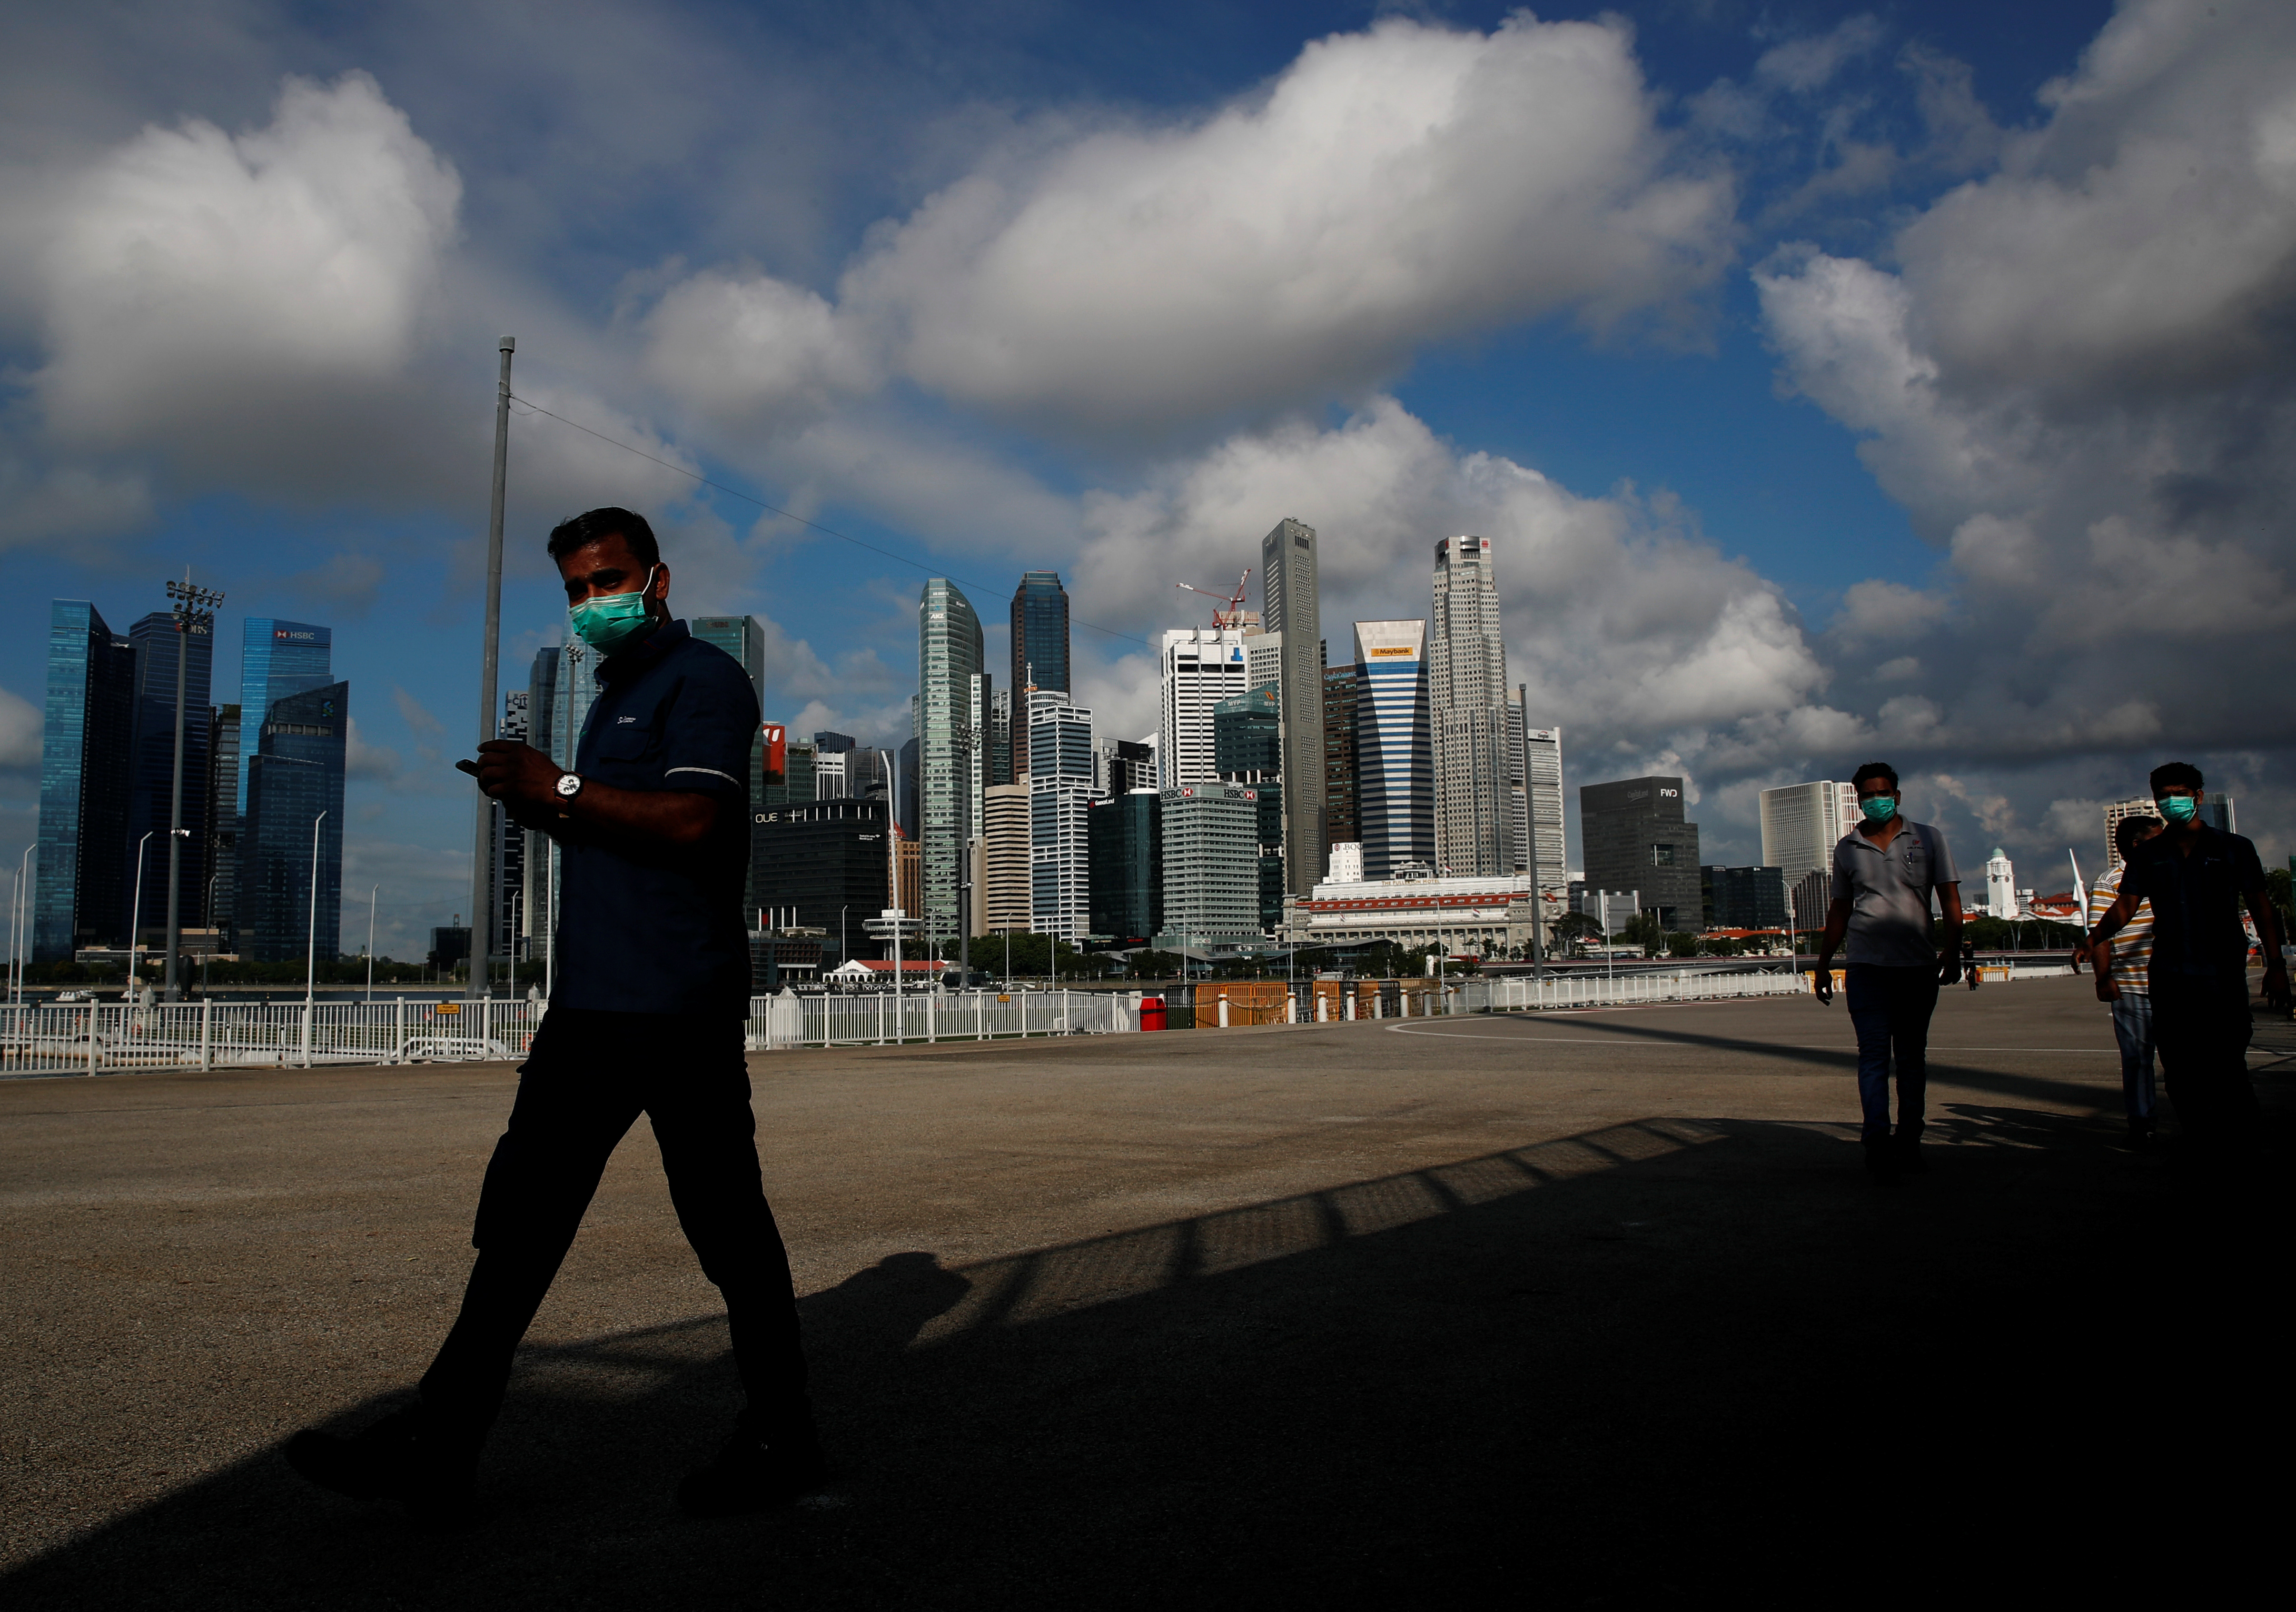 Essential workers wearing face masks walk past the skyline of the central business district outside a regional screening center amid the coronavirus disease (COVID-19) outbreak in Singapore June 9, 2020.  REUTERS/Edgar Su/Files